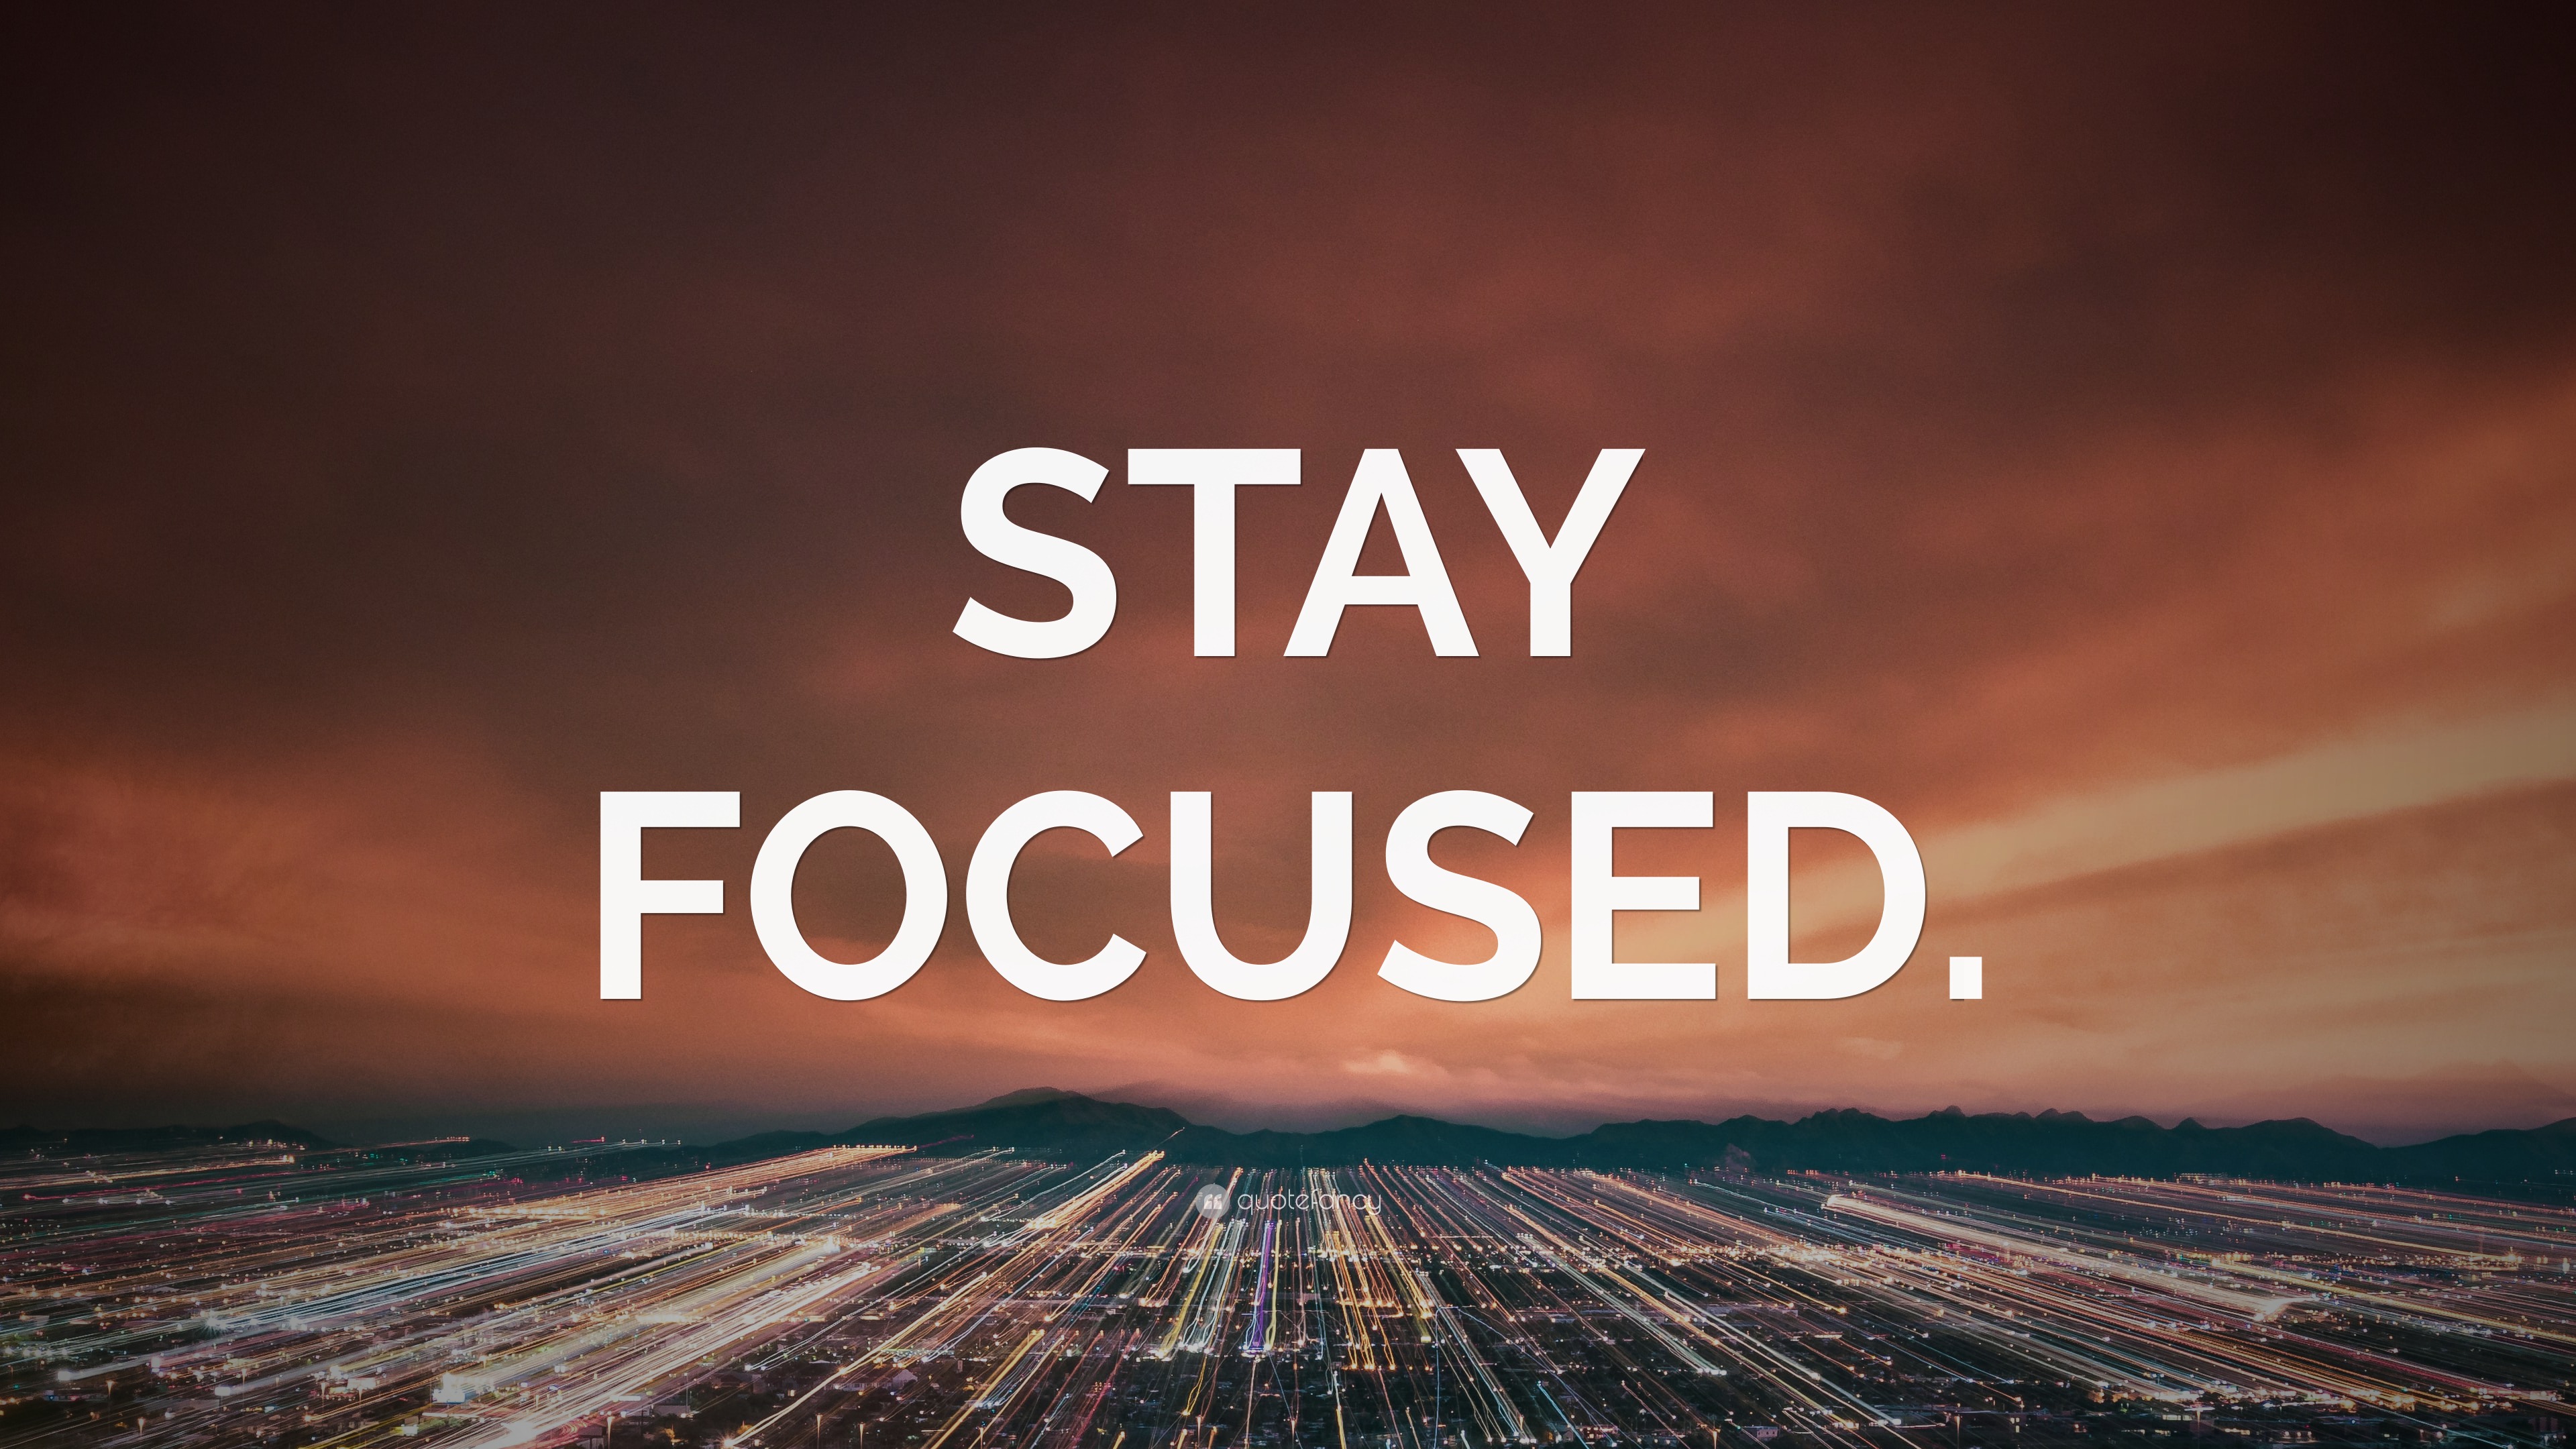 “STAY FOCUSED.” Wallpaper by QuoteFancy